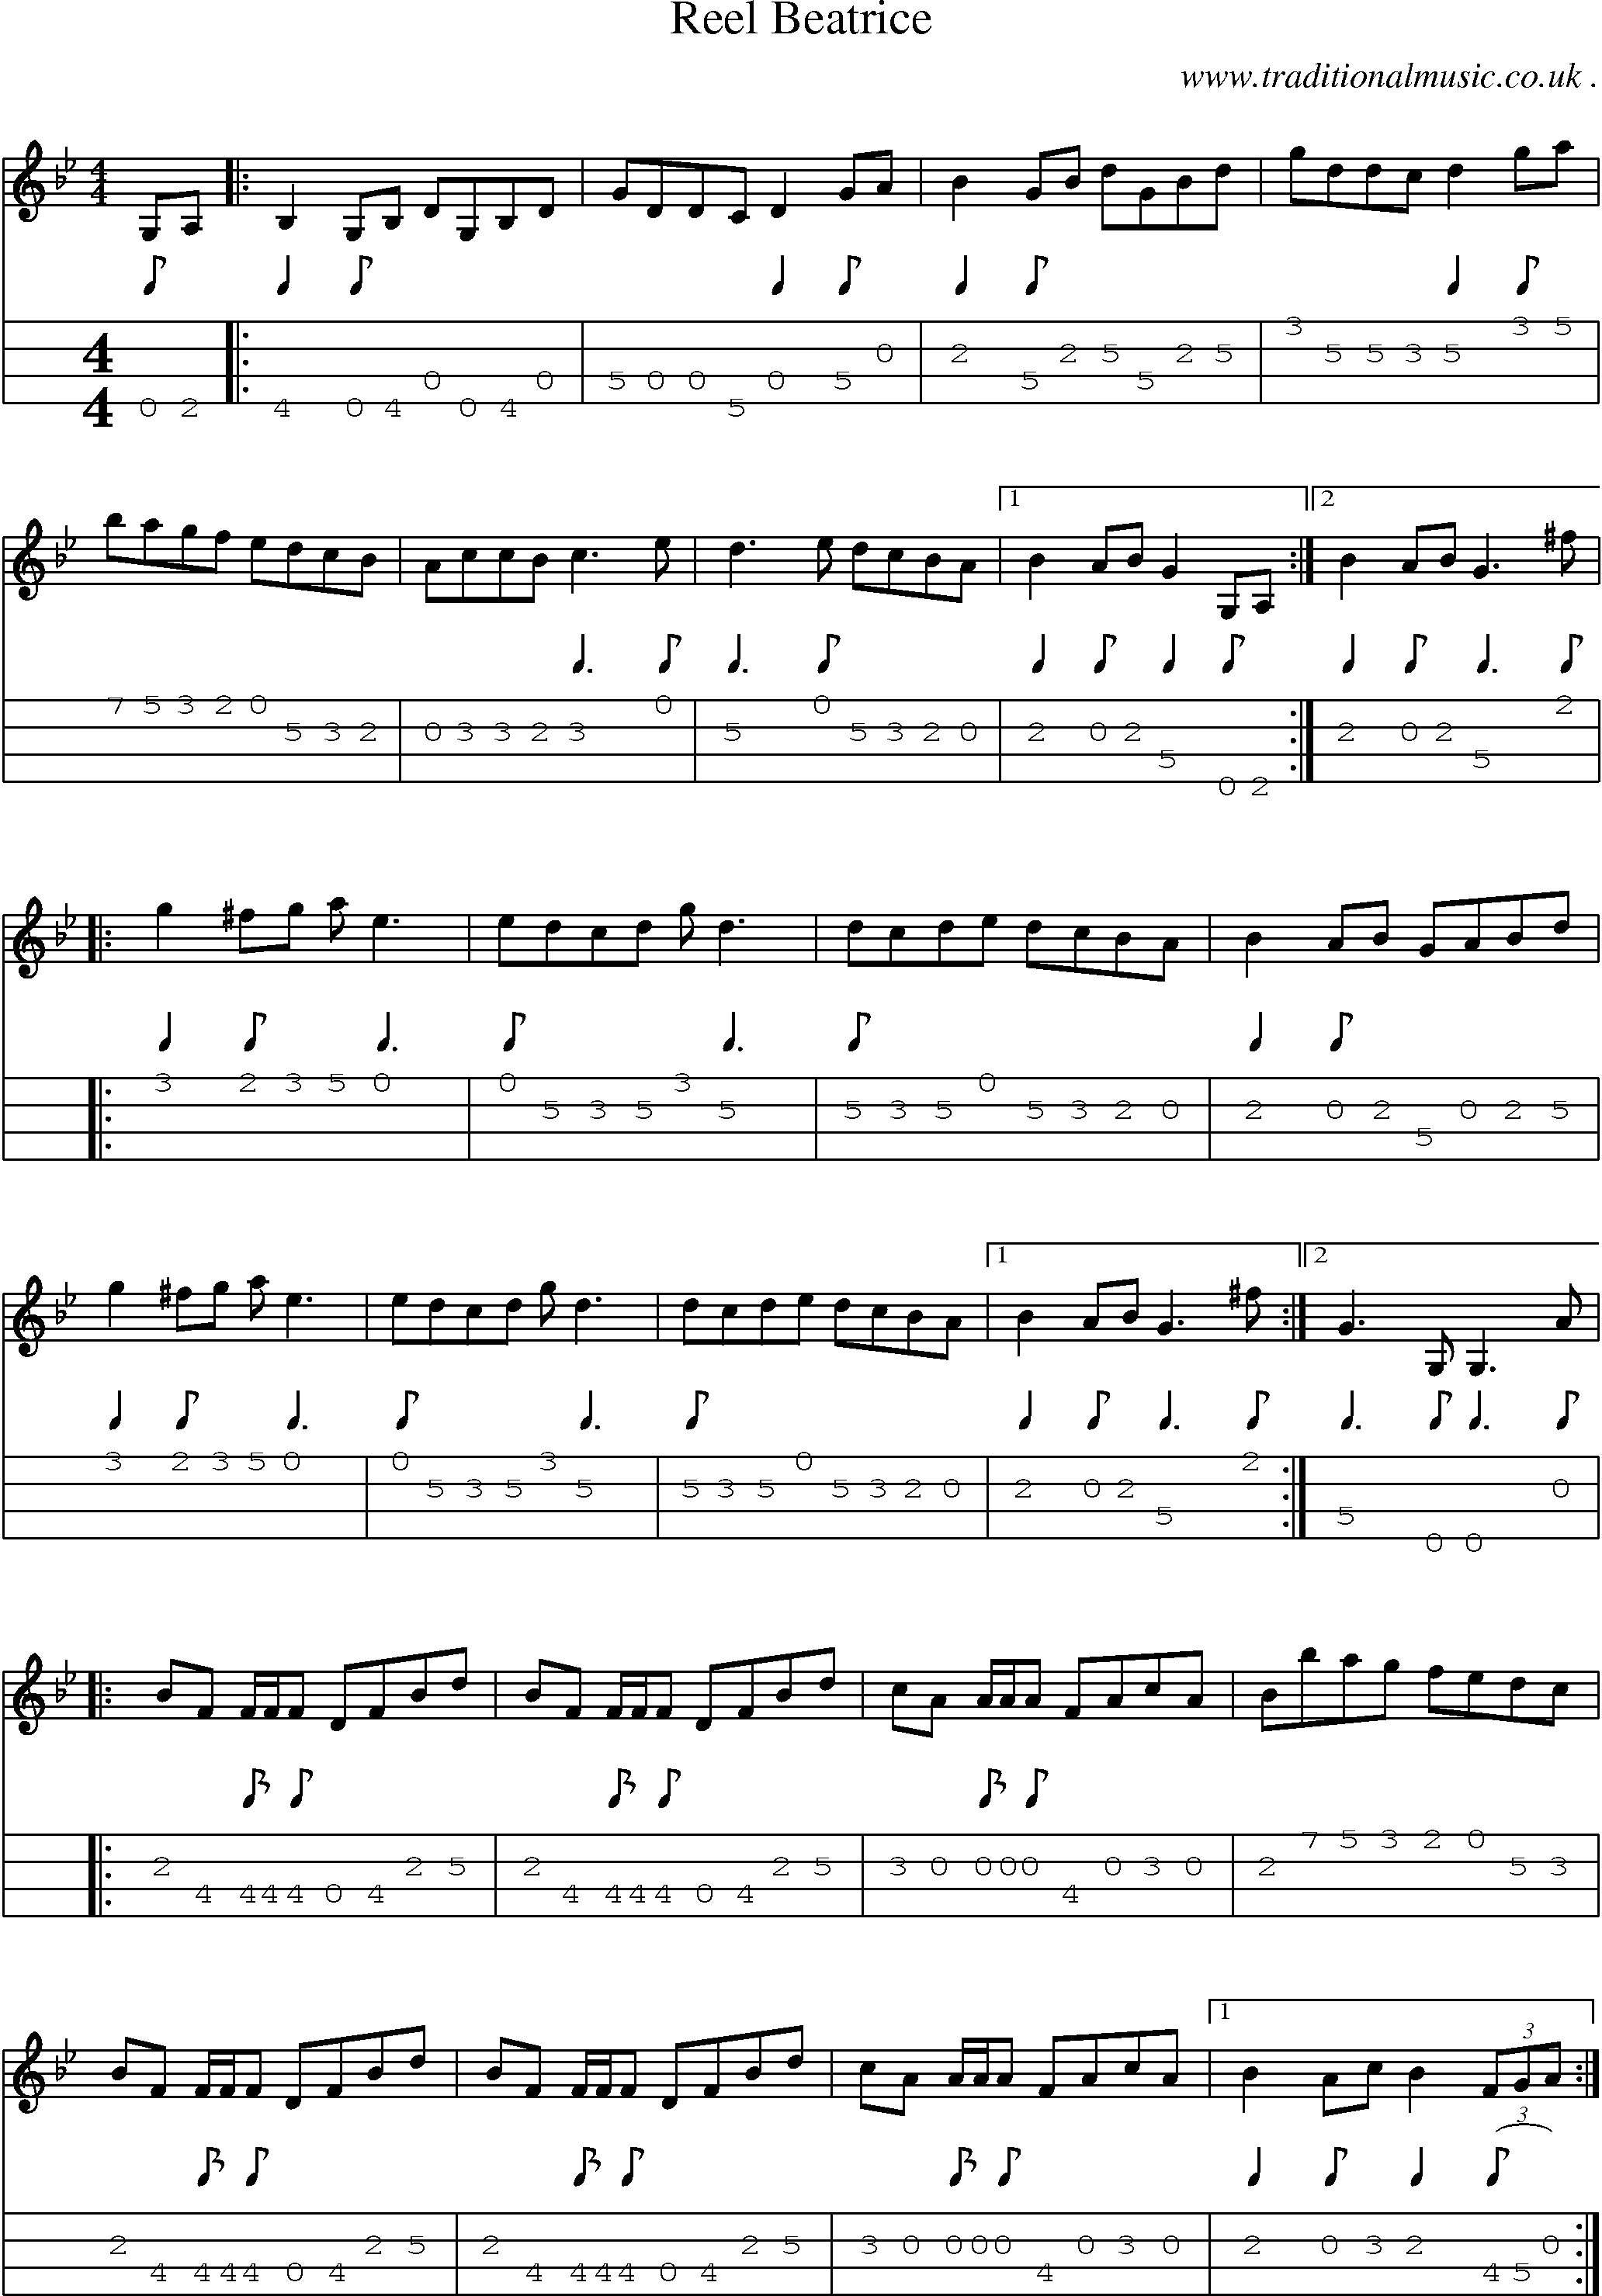 Sheet-Music and Mandolin Tabs for Reel Beatrice